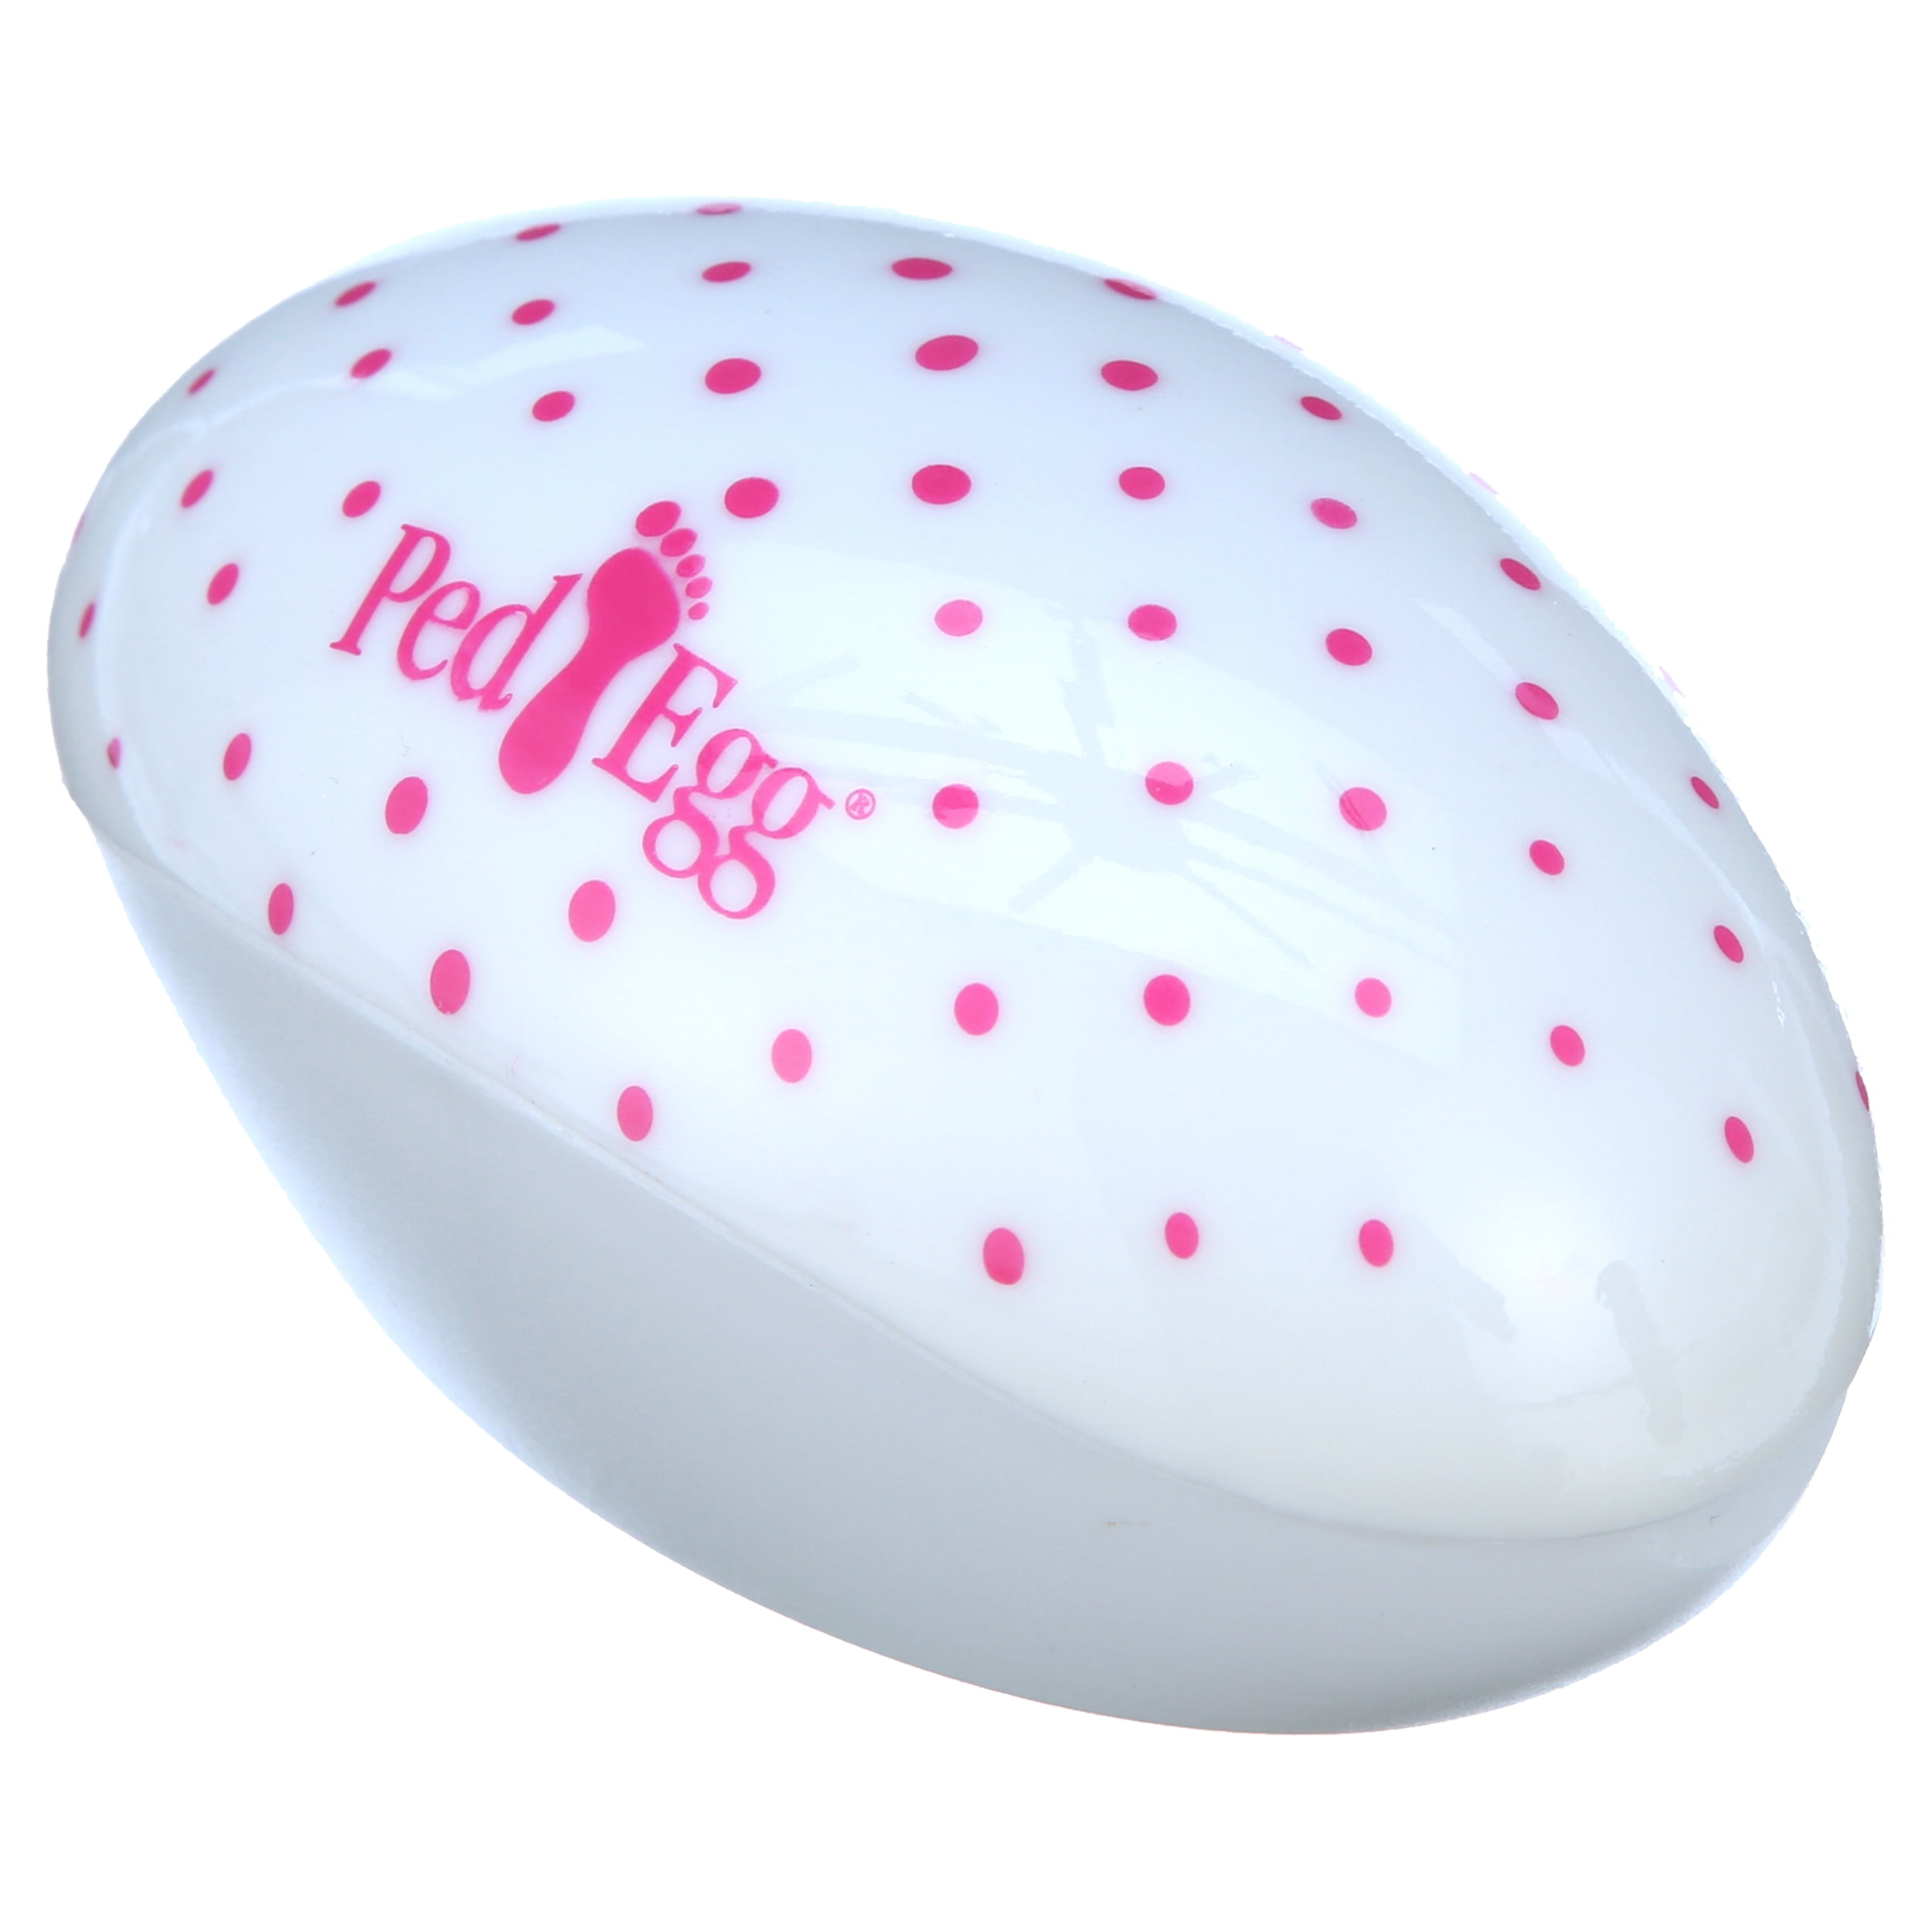  The Original Ped Egg - As Seen On TV3 : Foot Care Products :  Beauty & Personal Care